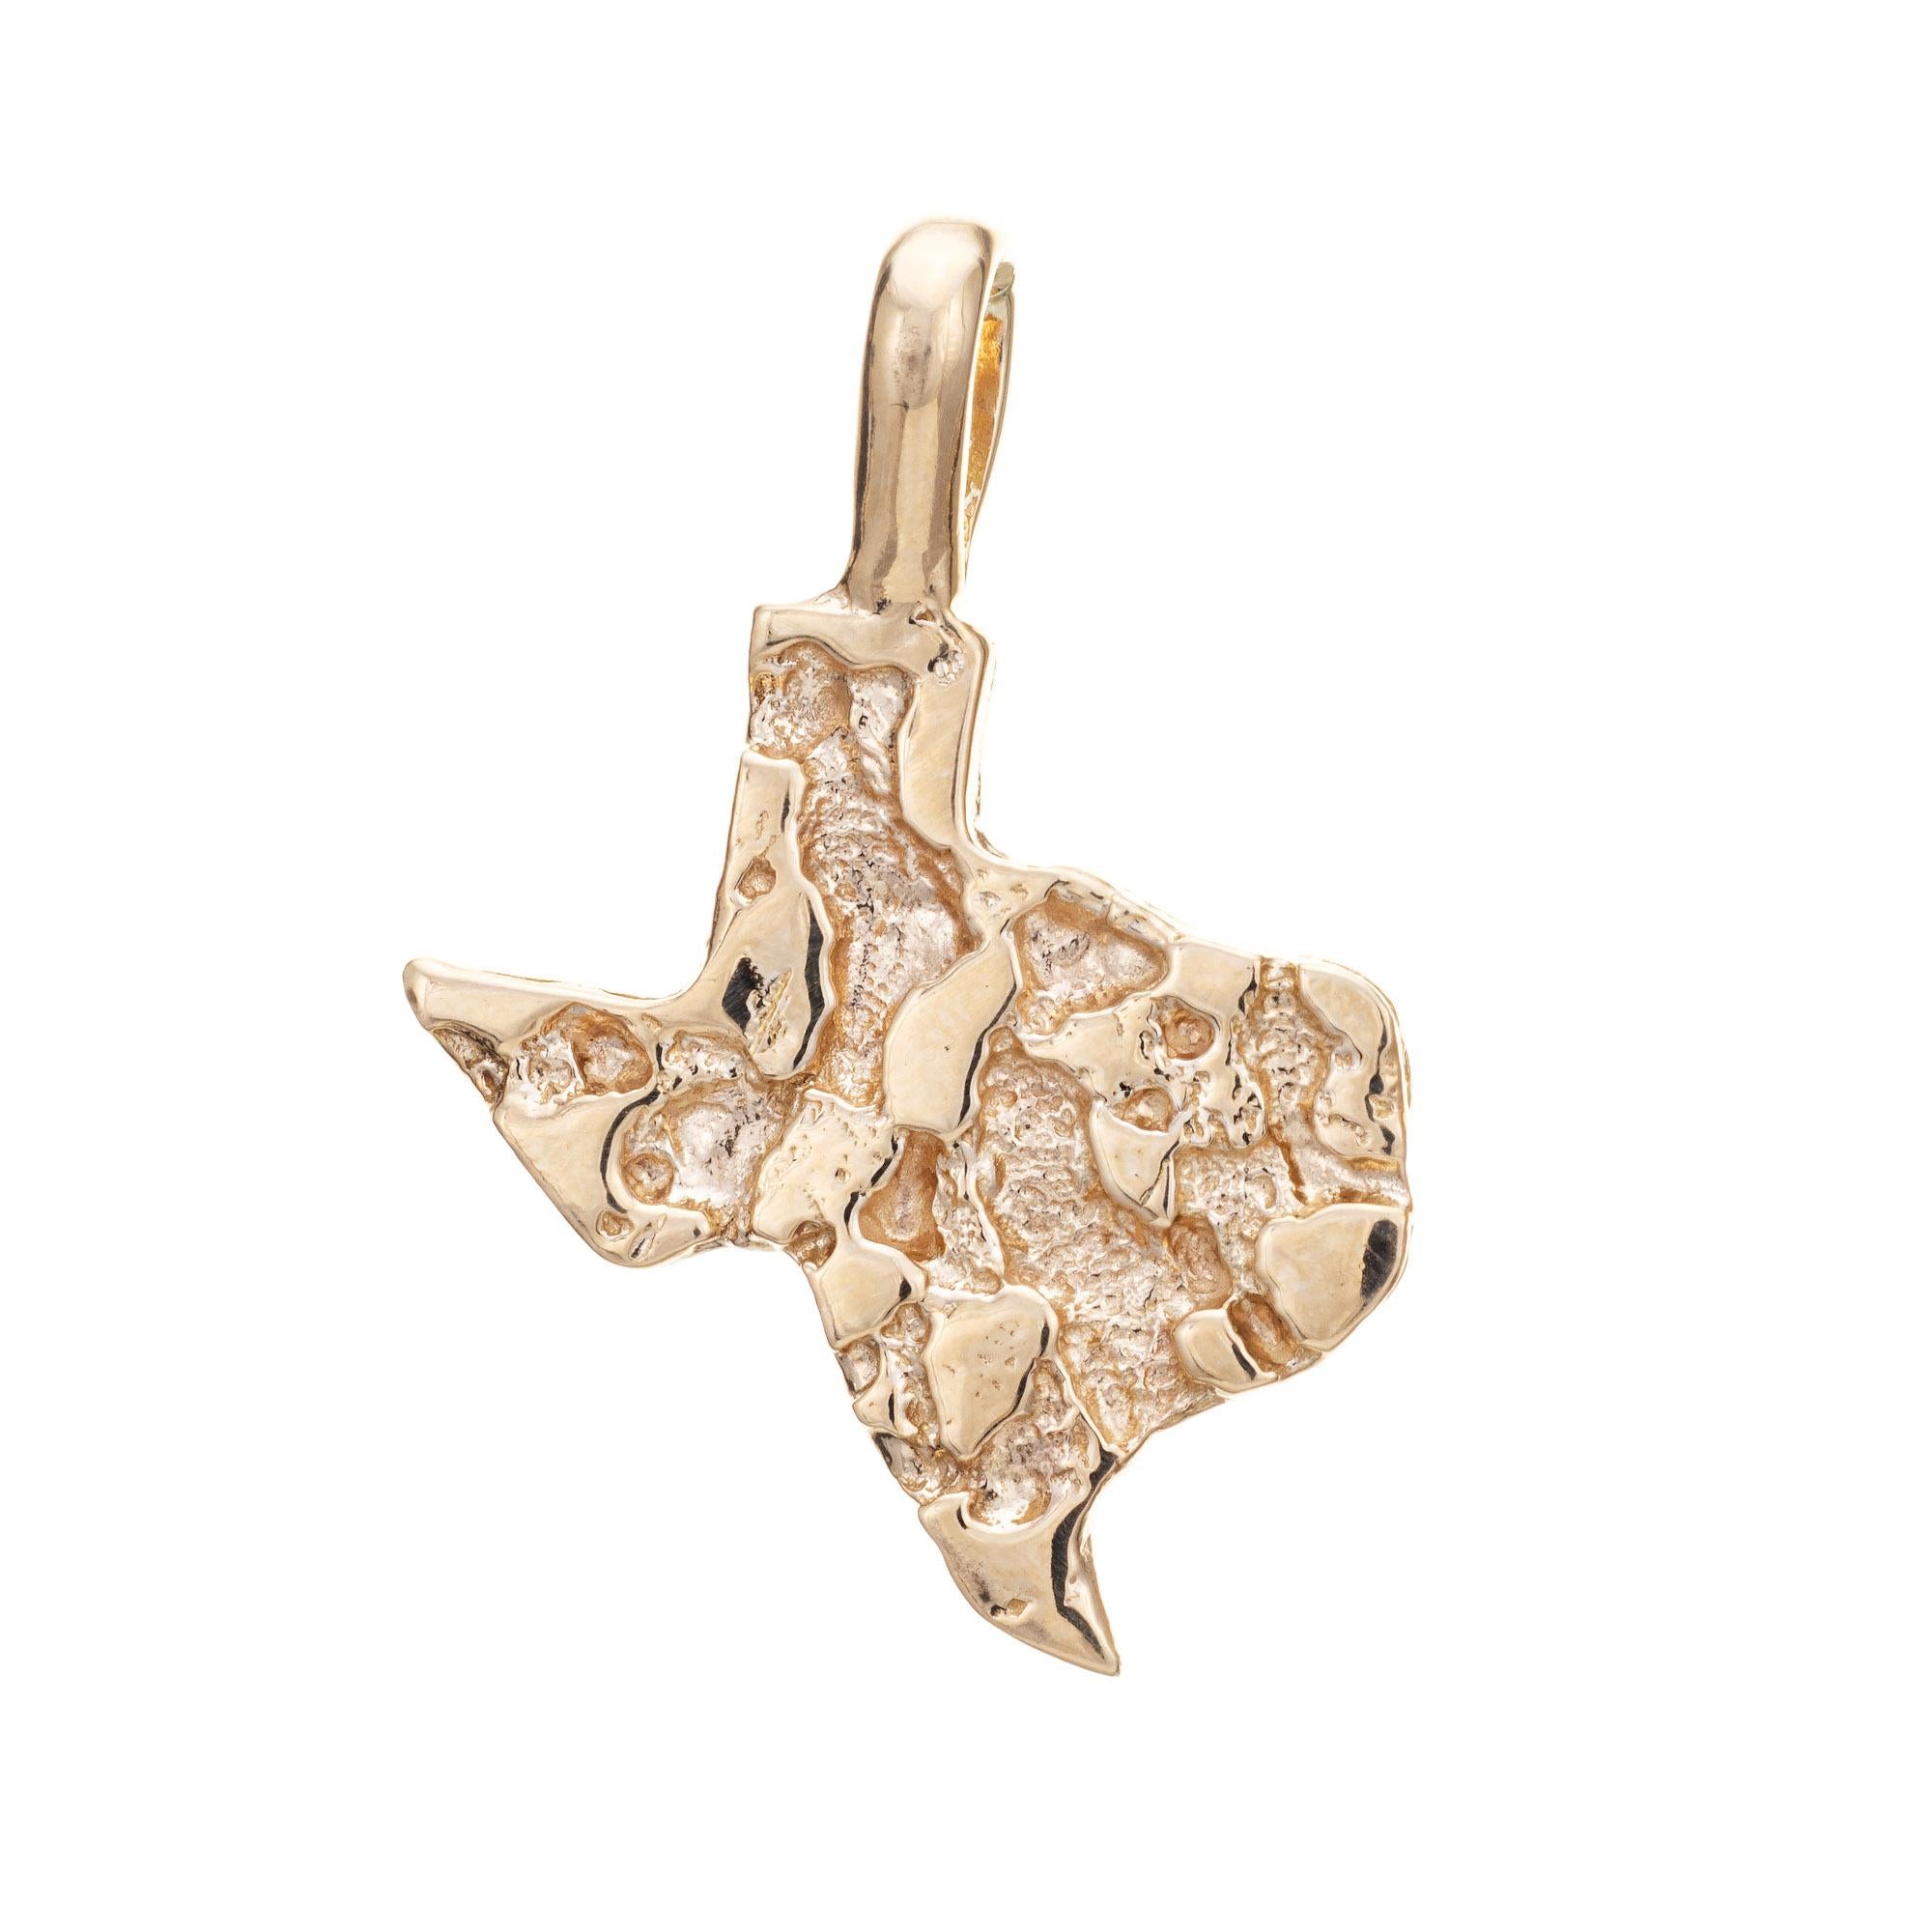 Modern State of Texas Nugget Pendant Vintage 14k Yellow Gold Charm Estate Fine Jewelry